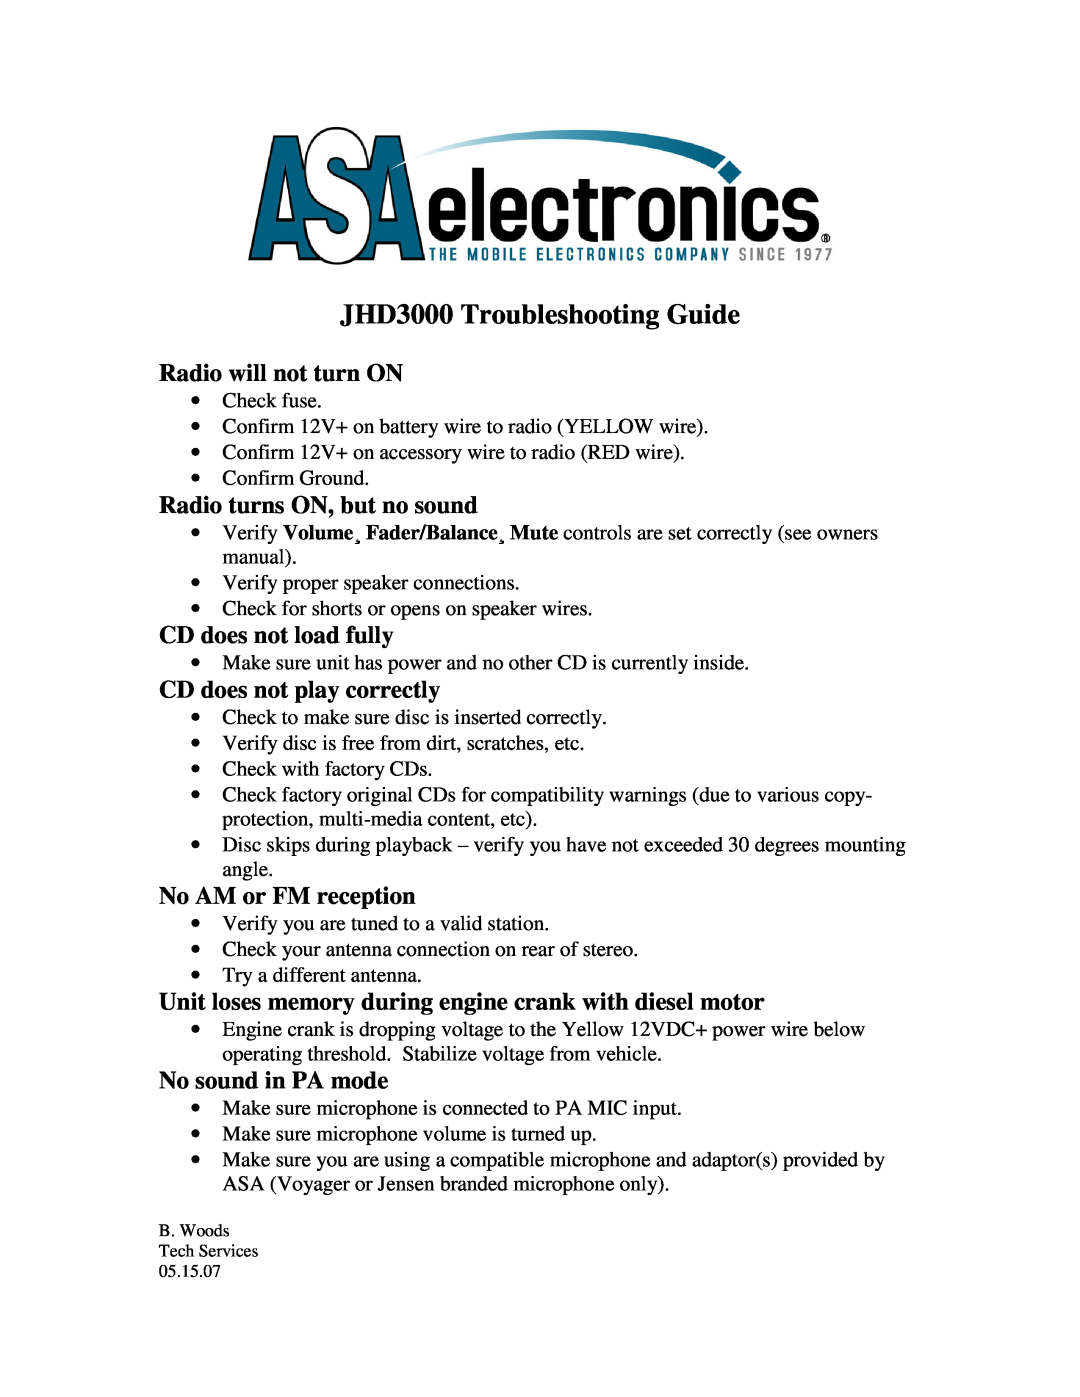 ASA Electronics owner manual JHD3000 Troubleshooting Guide, Radio will not turn ON, Radio turns ON, but no sound 